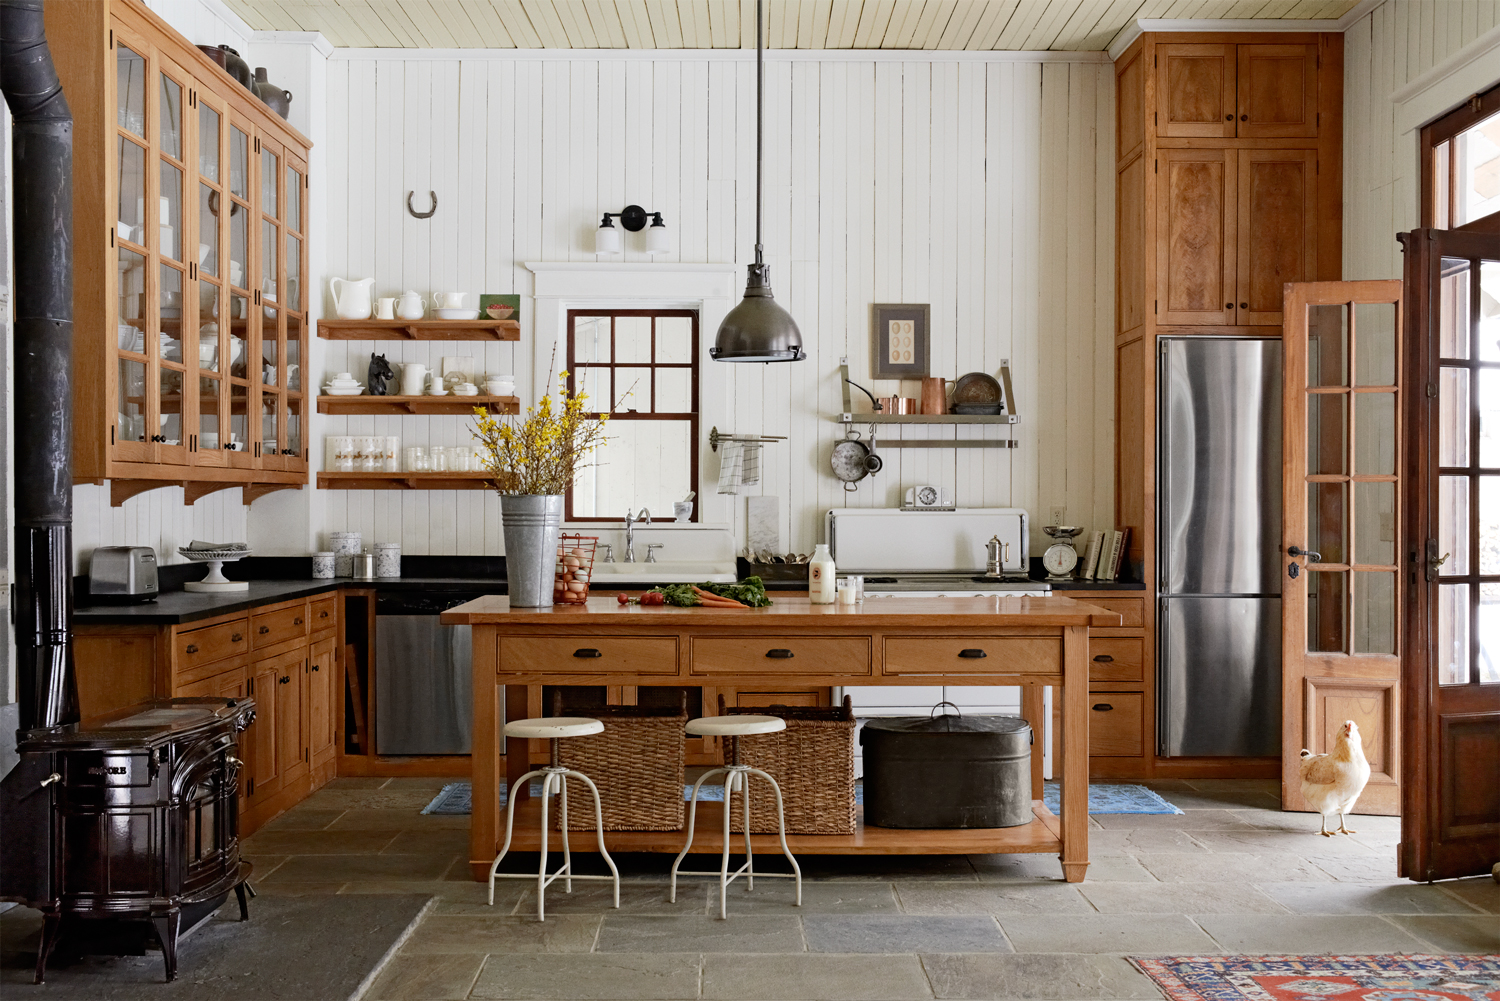 Check out these 10 Kitchen Trends for 2016